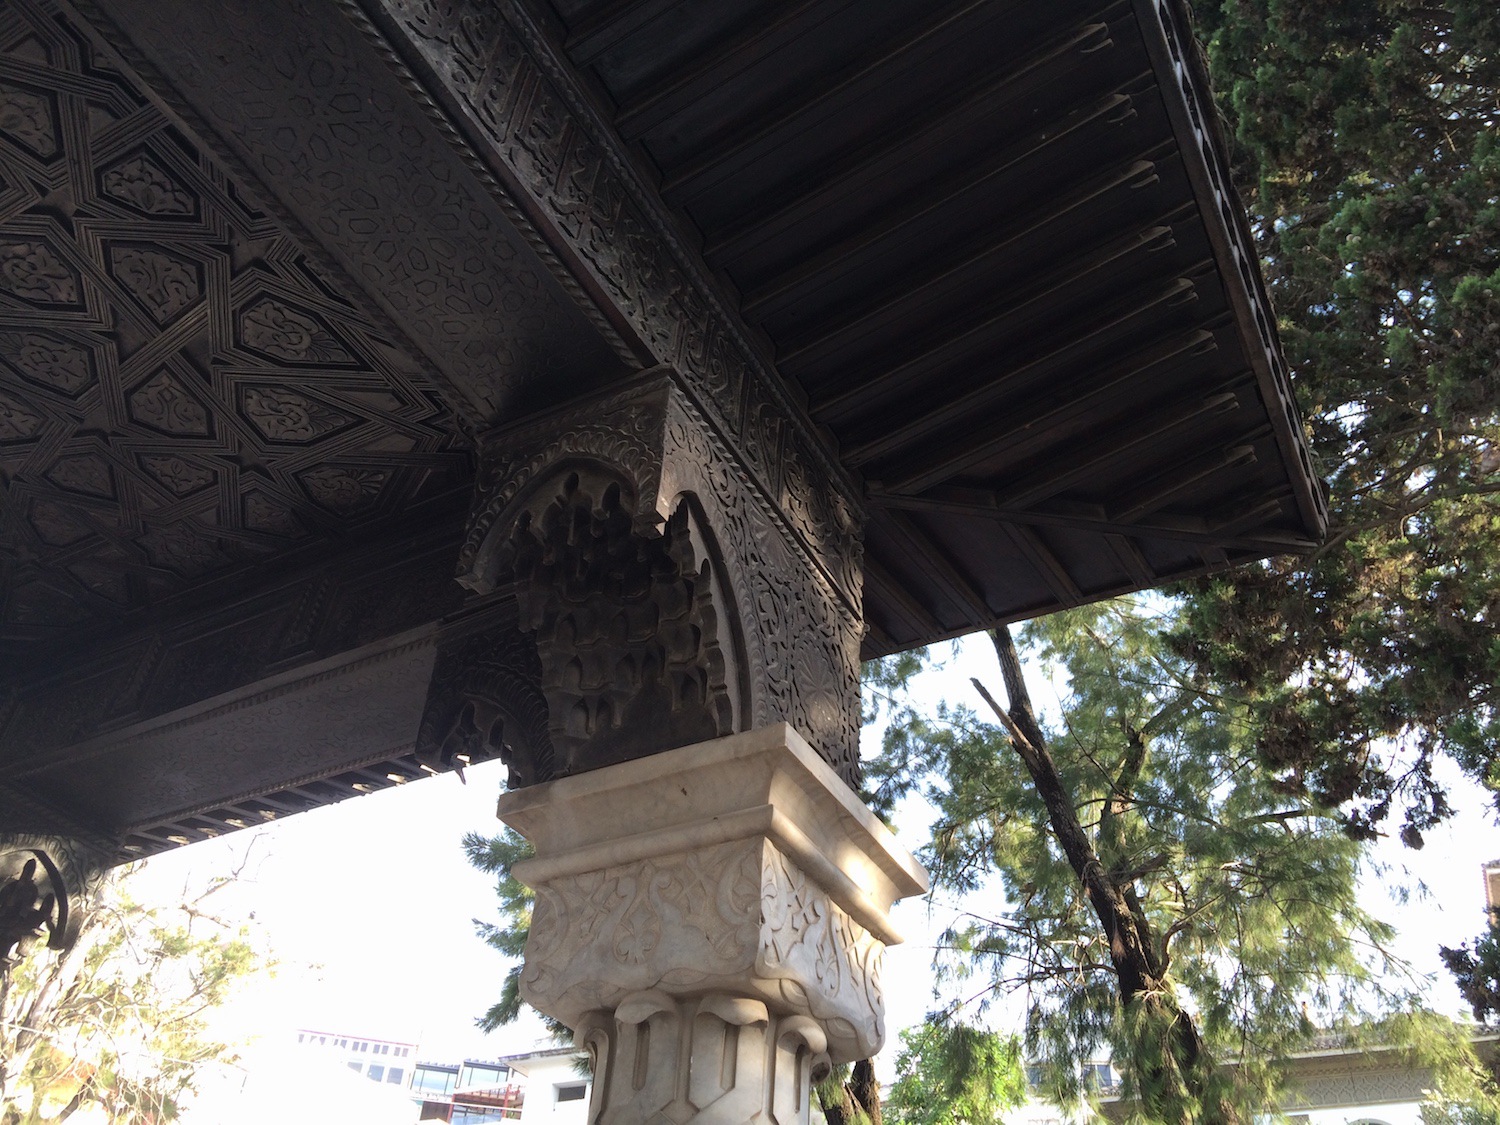 Detail view of a column capital and wood ceiling